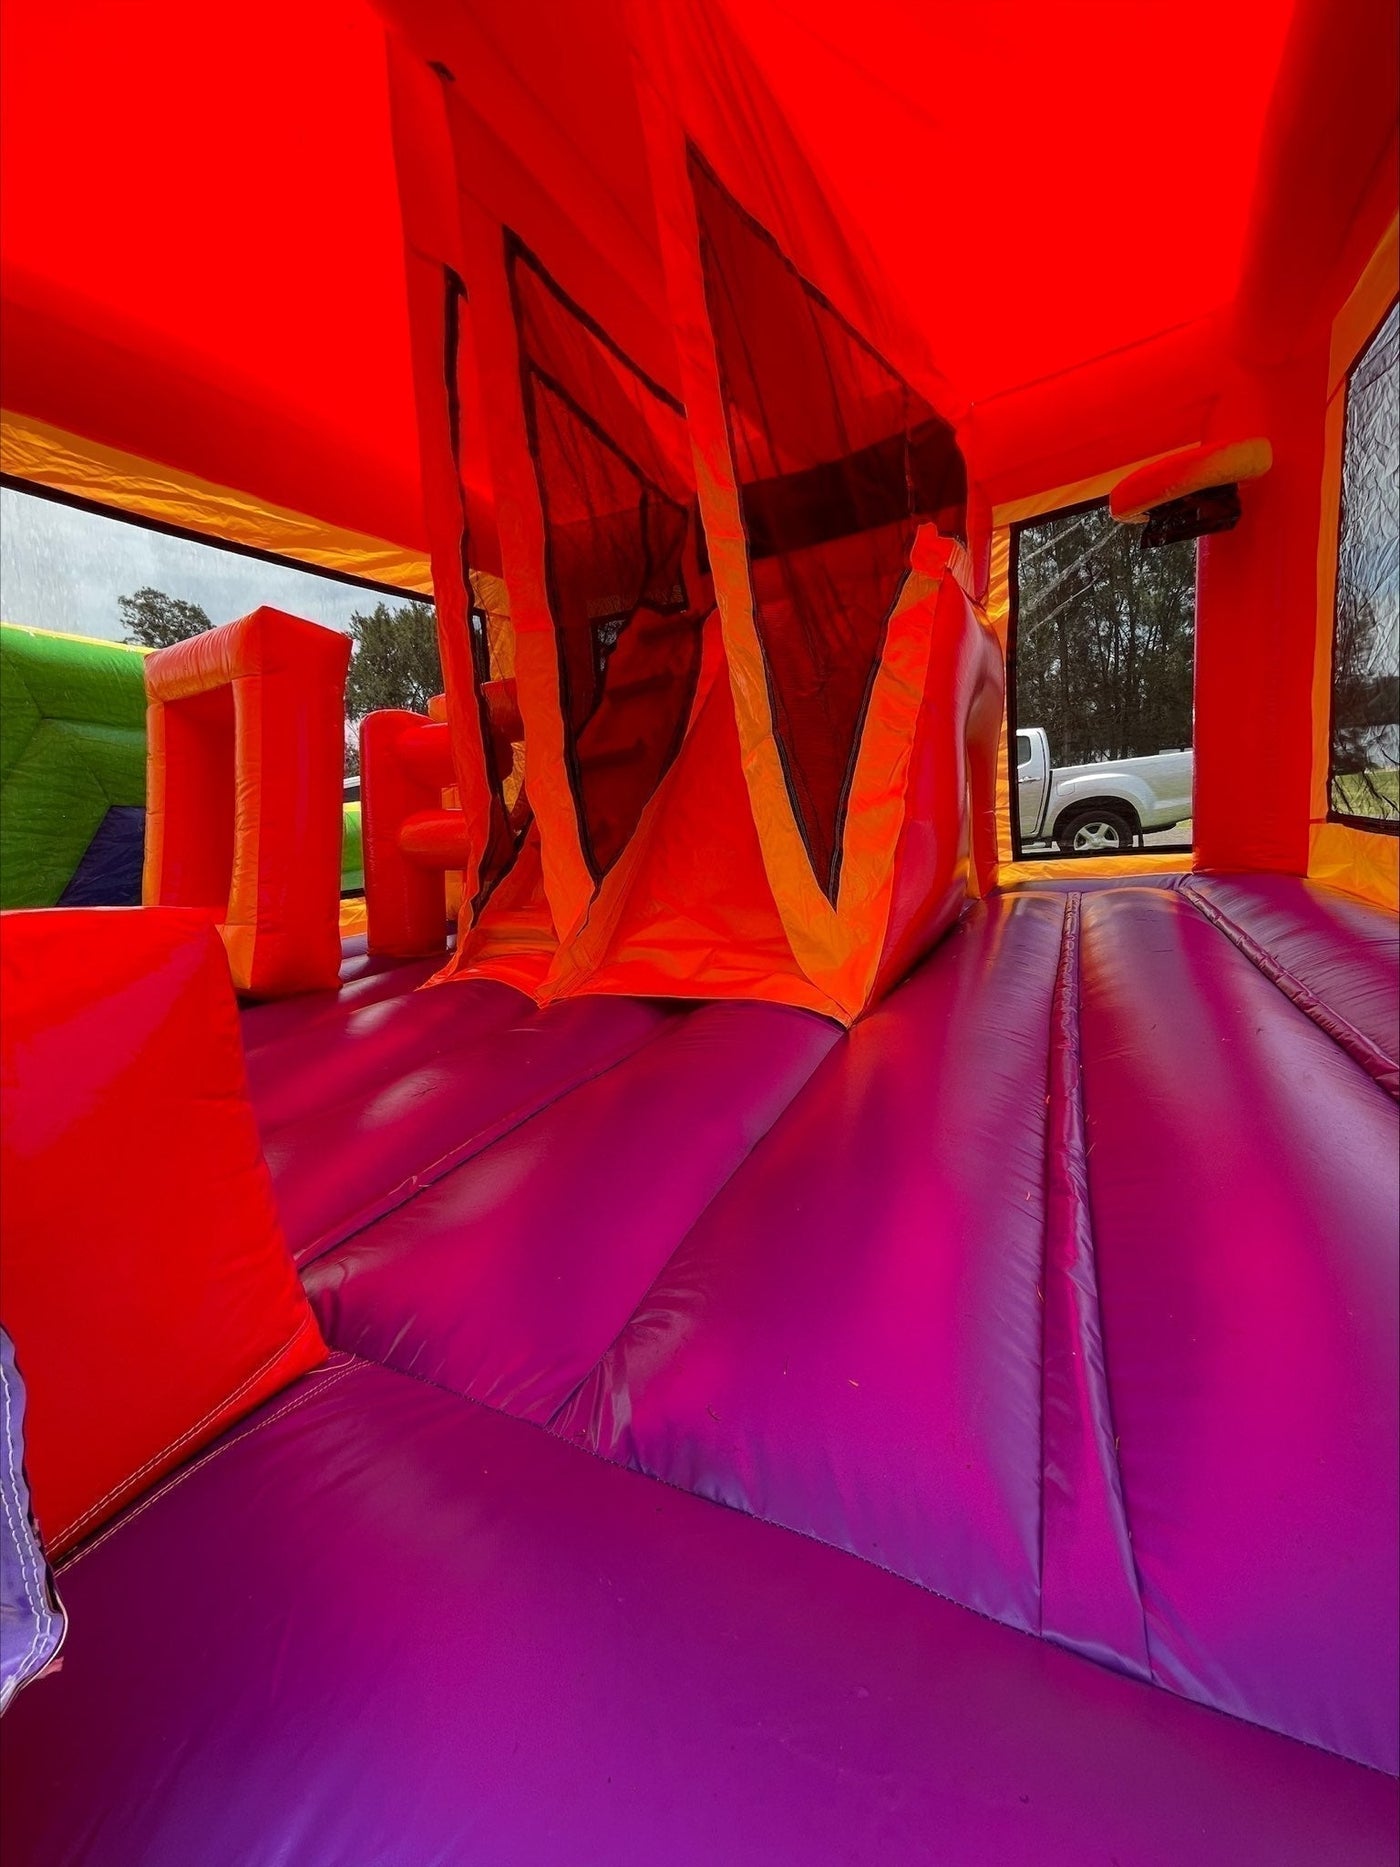 LOL Surprise  Extra Large Obstacle Combo Jumping Castle